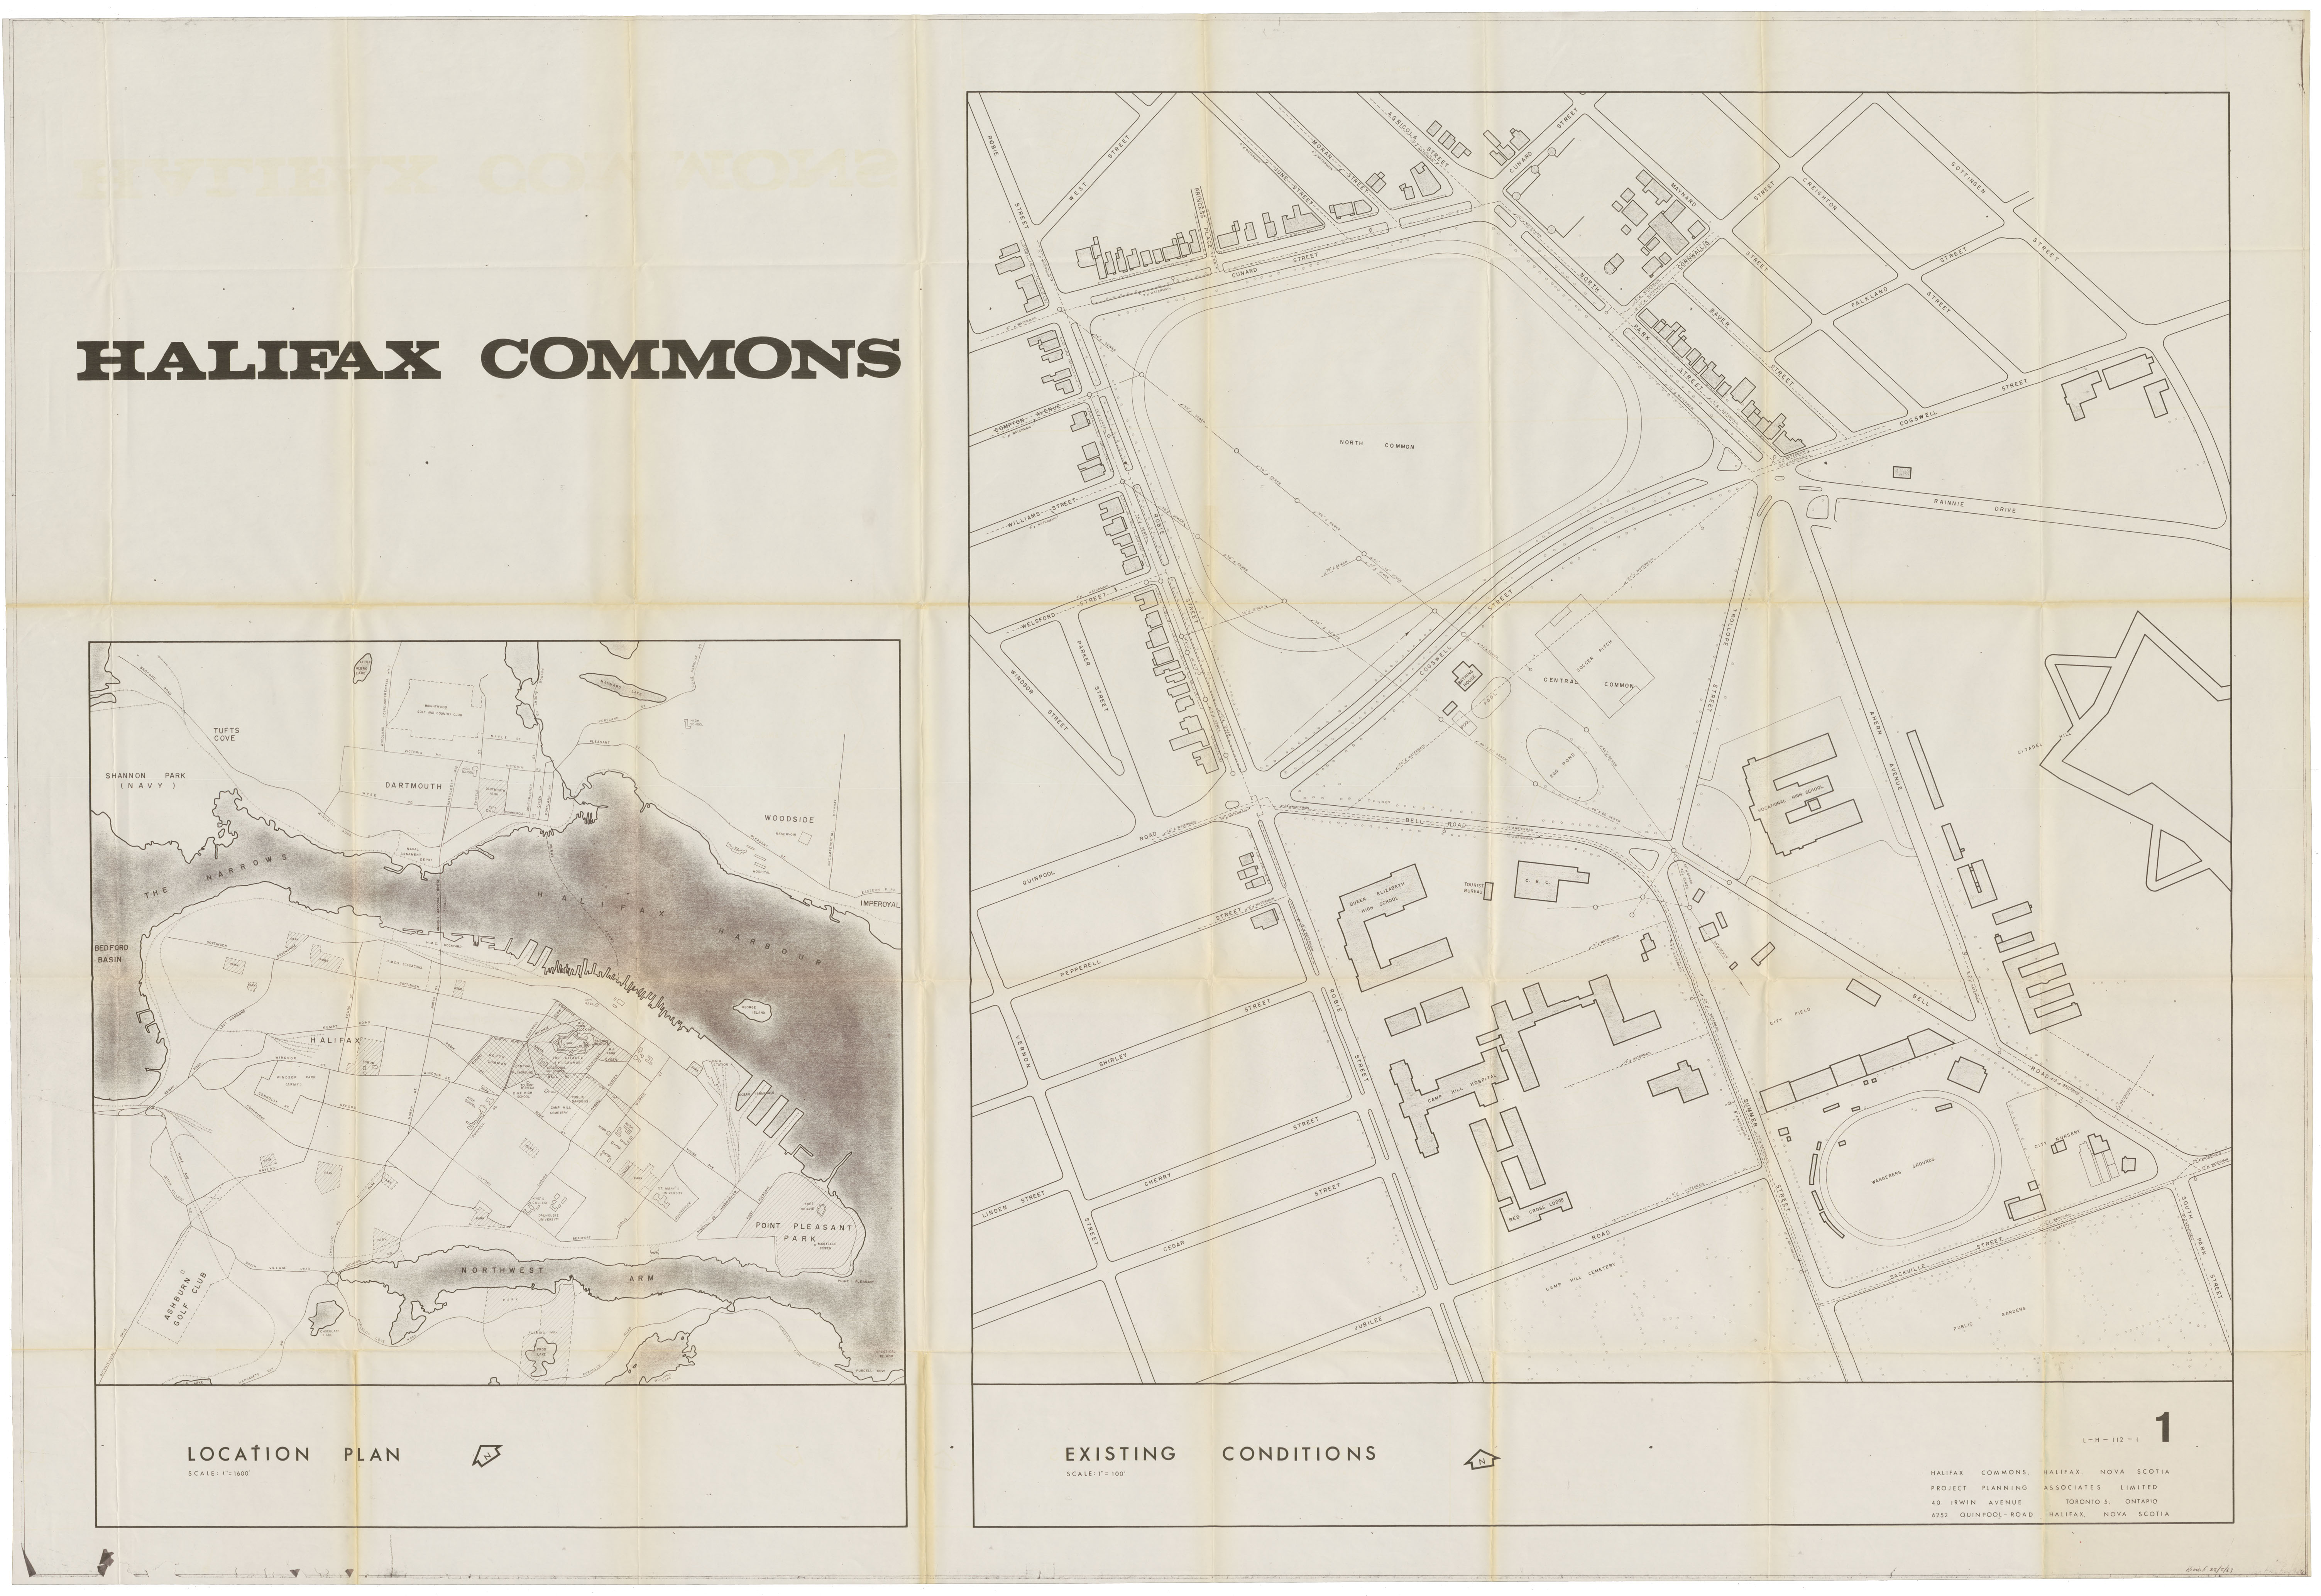 maps : Halifax Commons 1(L-H-112-1) Location Site Existing Conditions Revised 1963